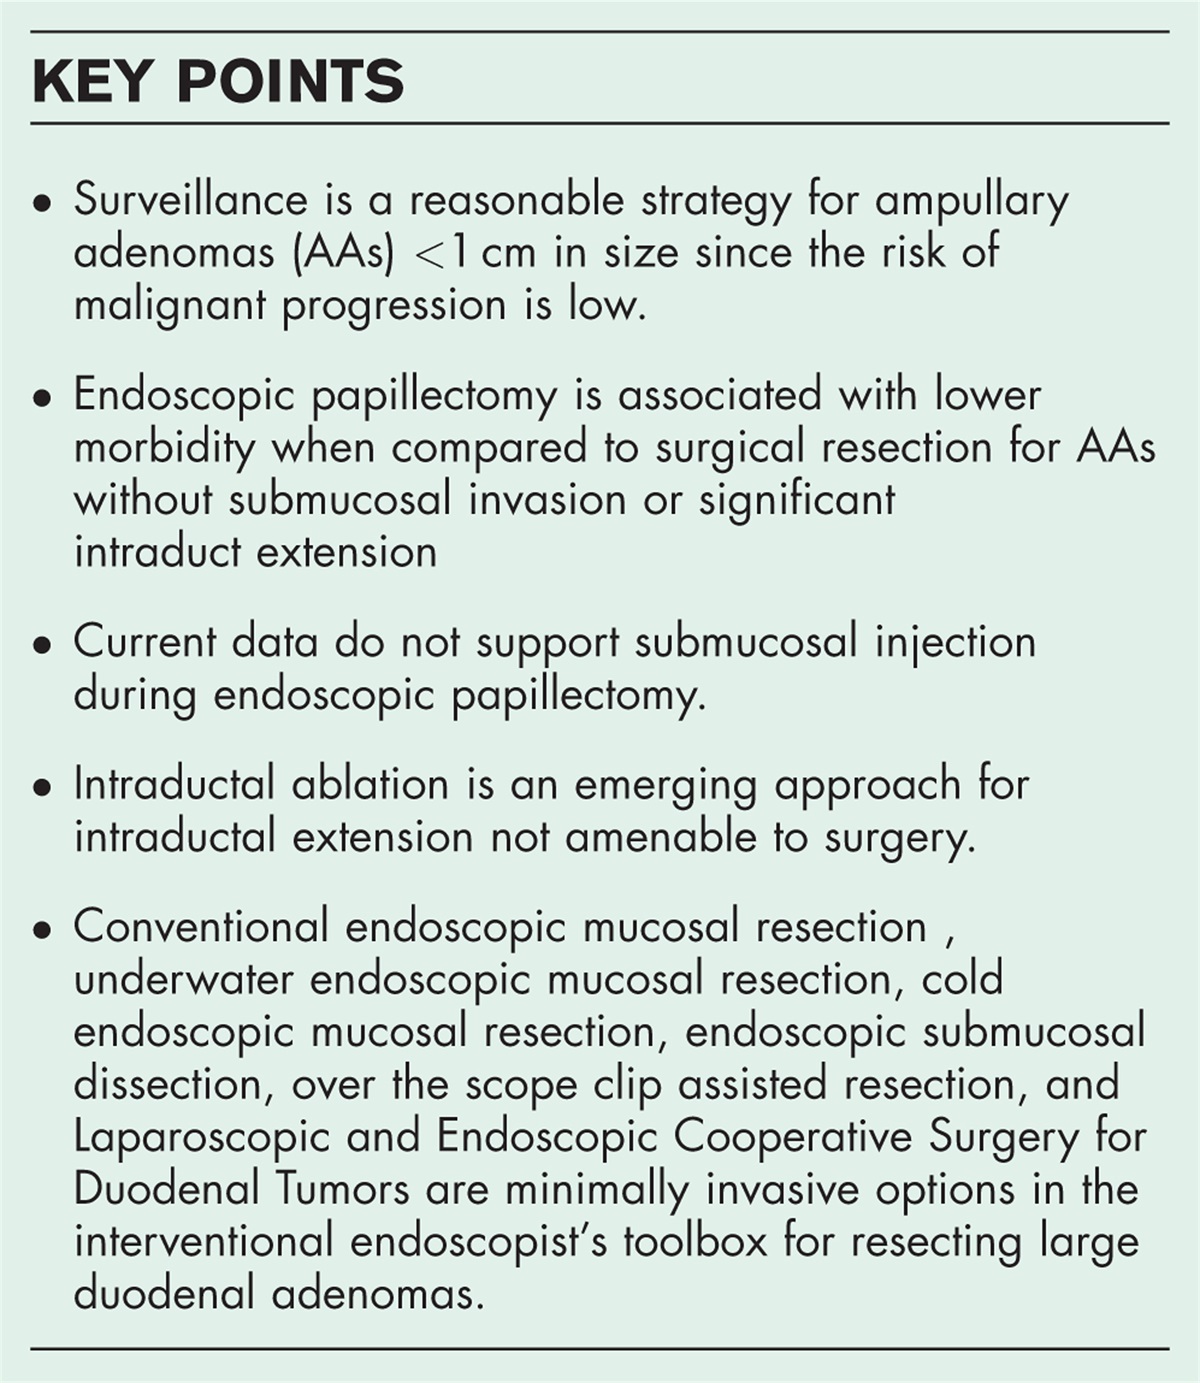 Updates in endoscopic management of ampullary and duodenal adenomas